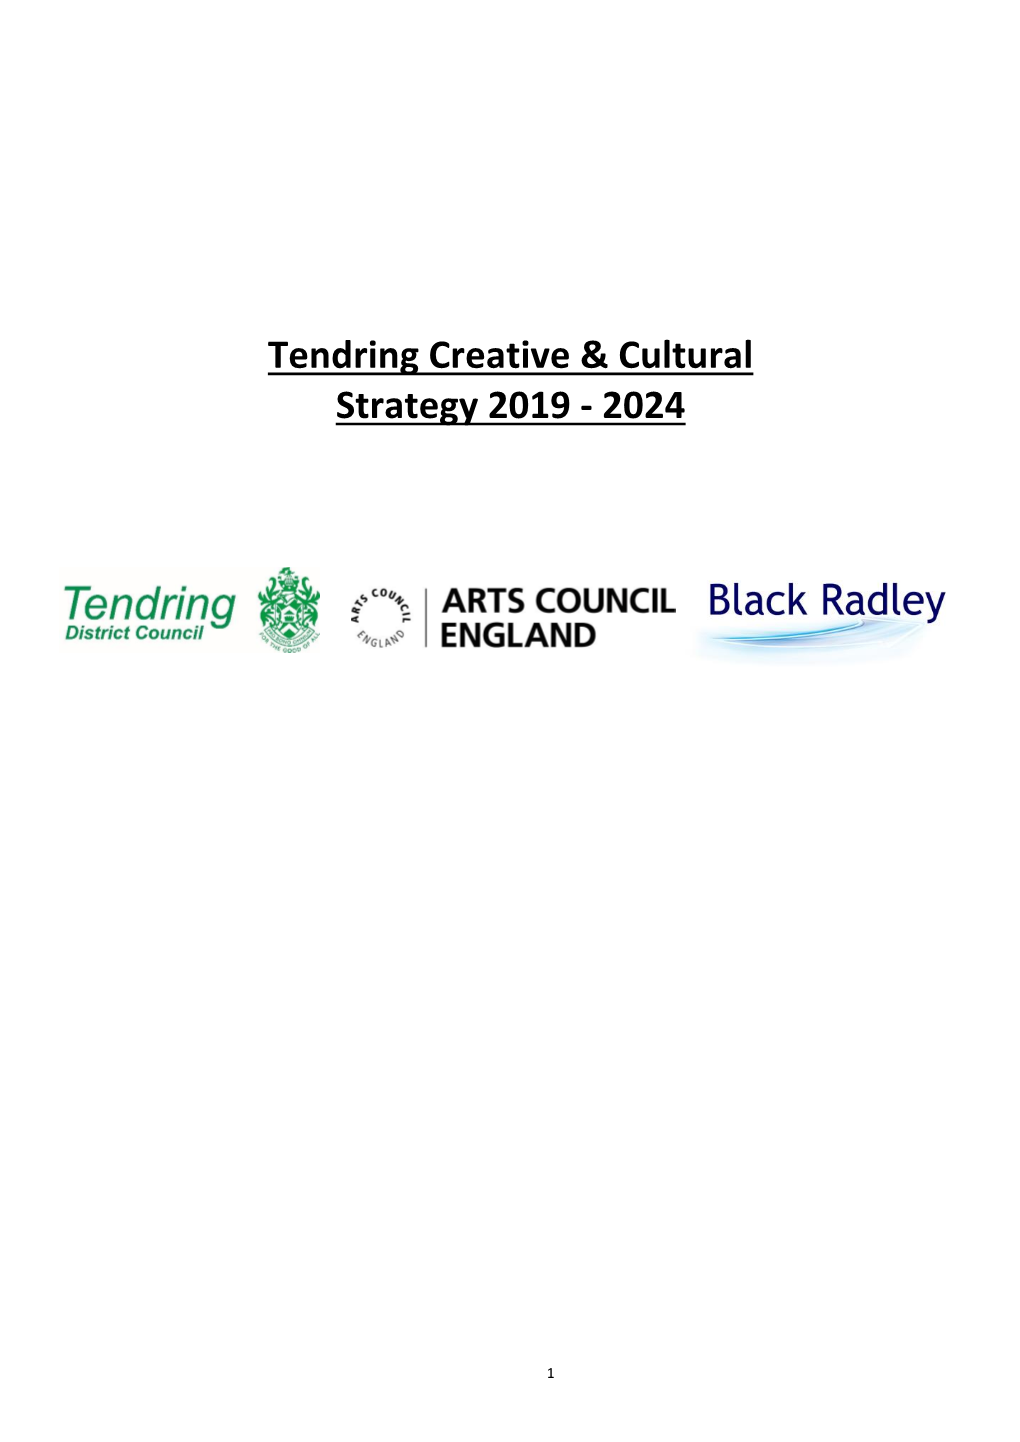 Tendring Creative and Cultural Strategy 2019